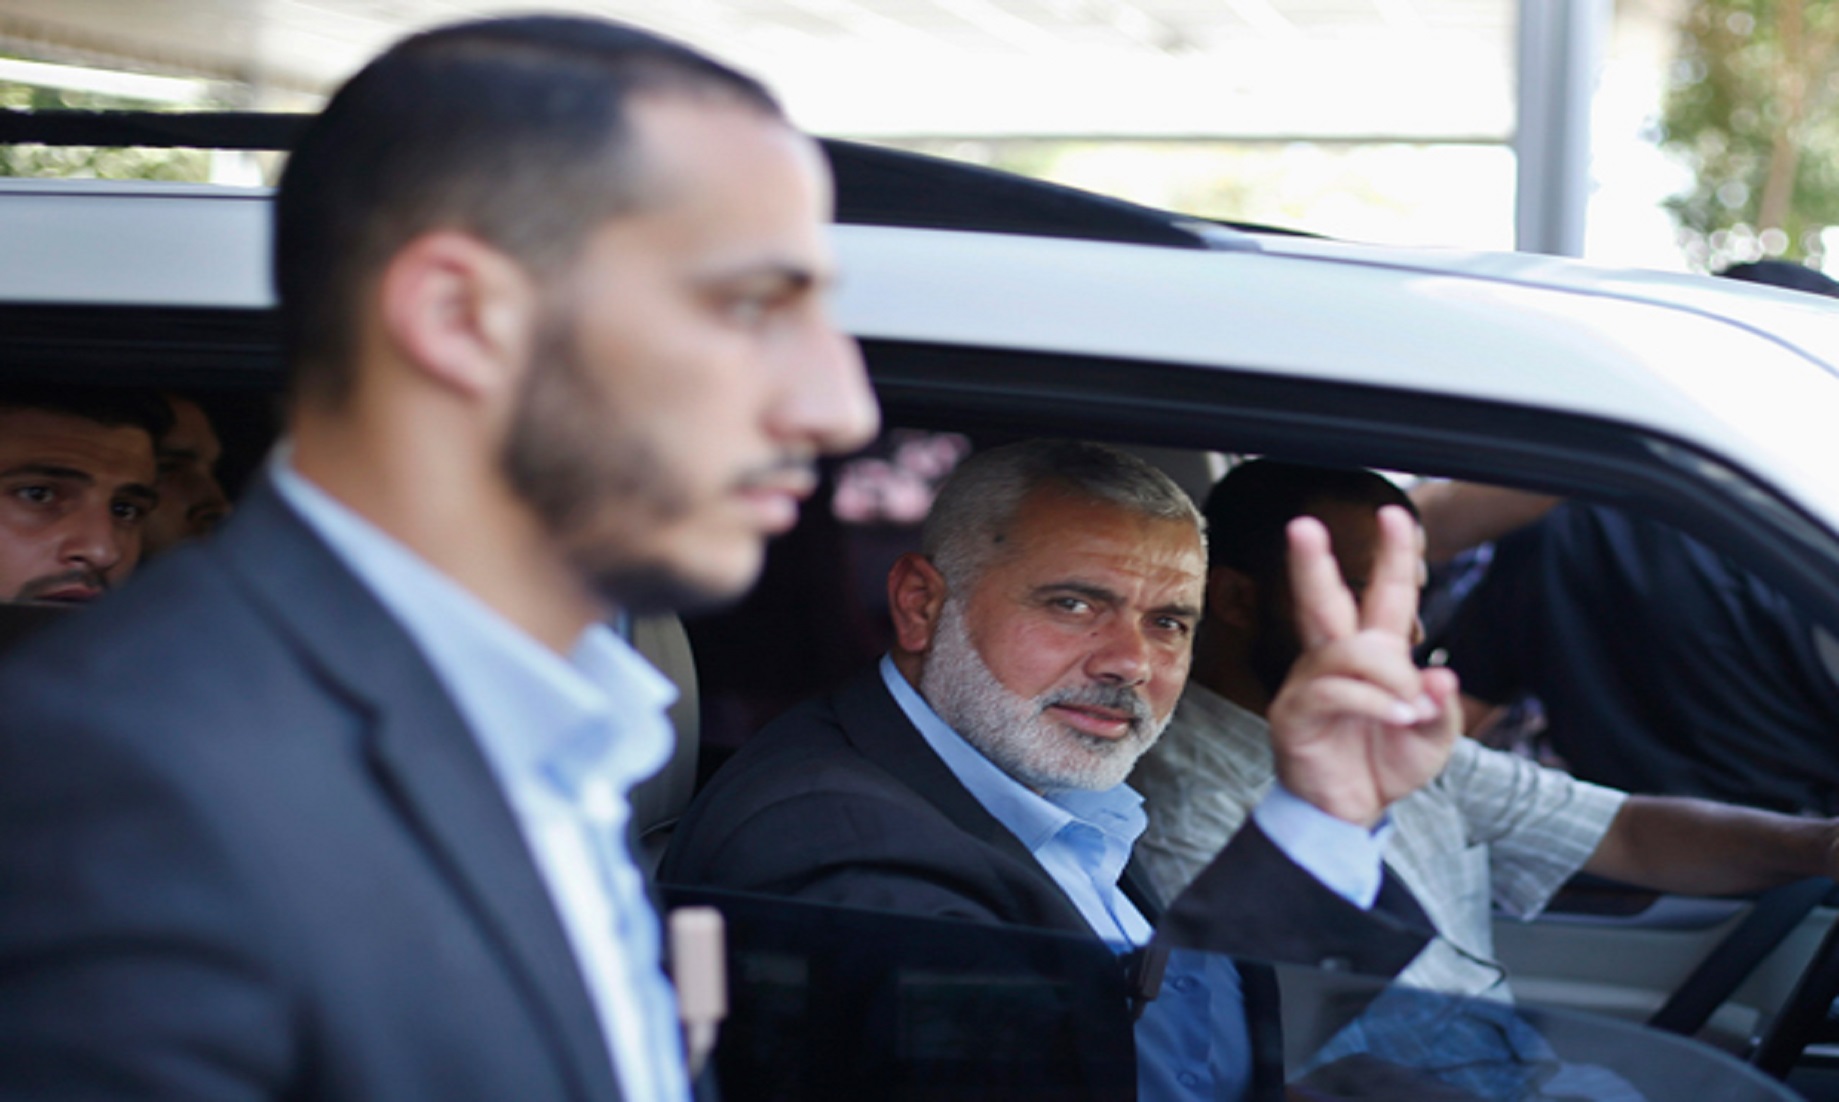 Hamas Leaders To Discuss In Cairo Cease-Fire, Prisoner Swap Deal With Israel: Official